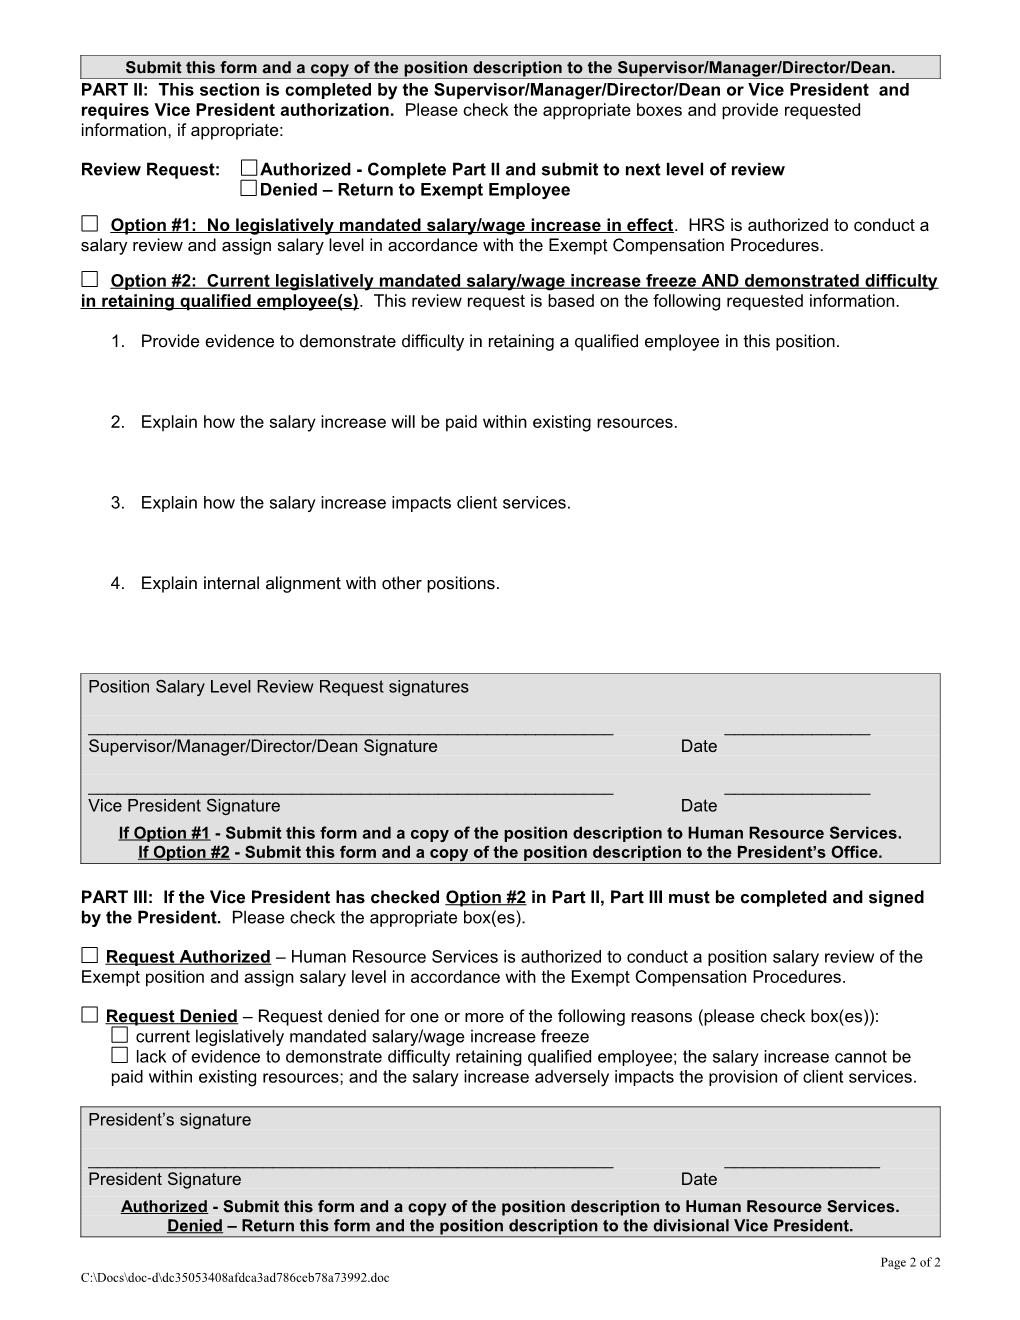 Exempt Position Salary Level Review Request Form